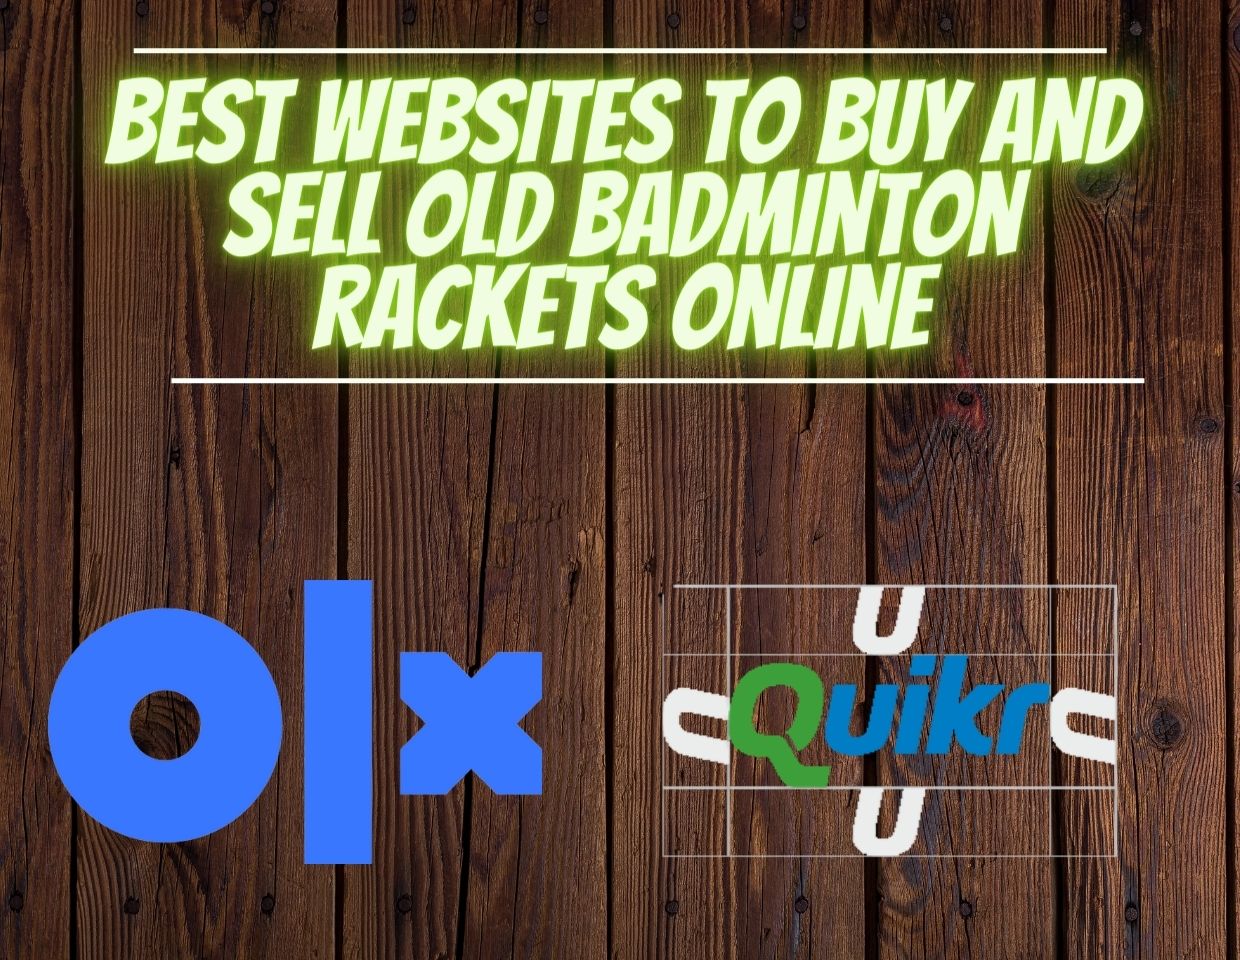 Best-Places-to-Buy-and-Sell-Used-Badminton-Rackets